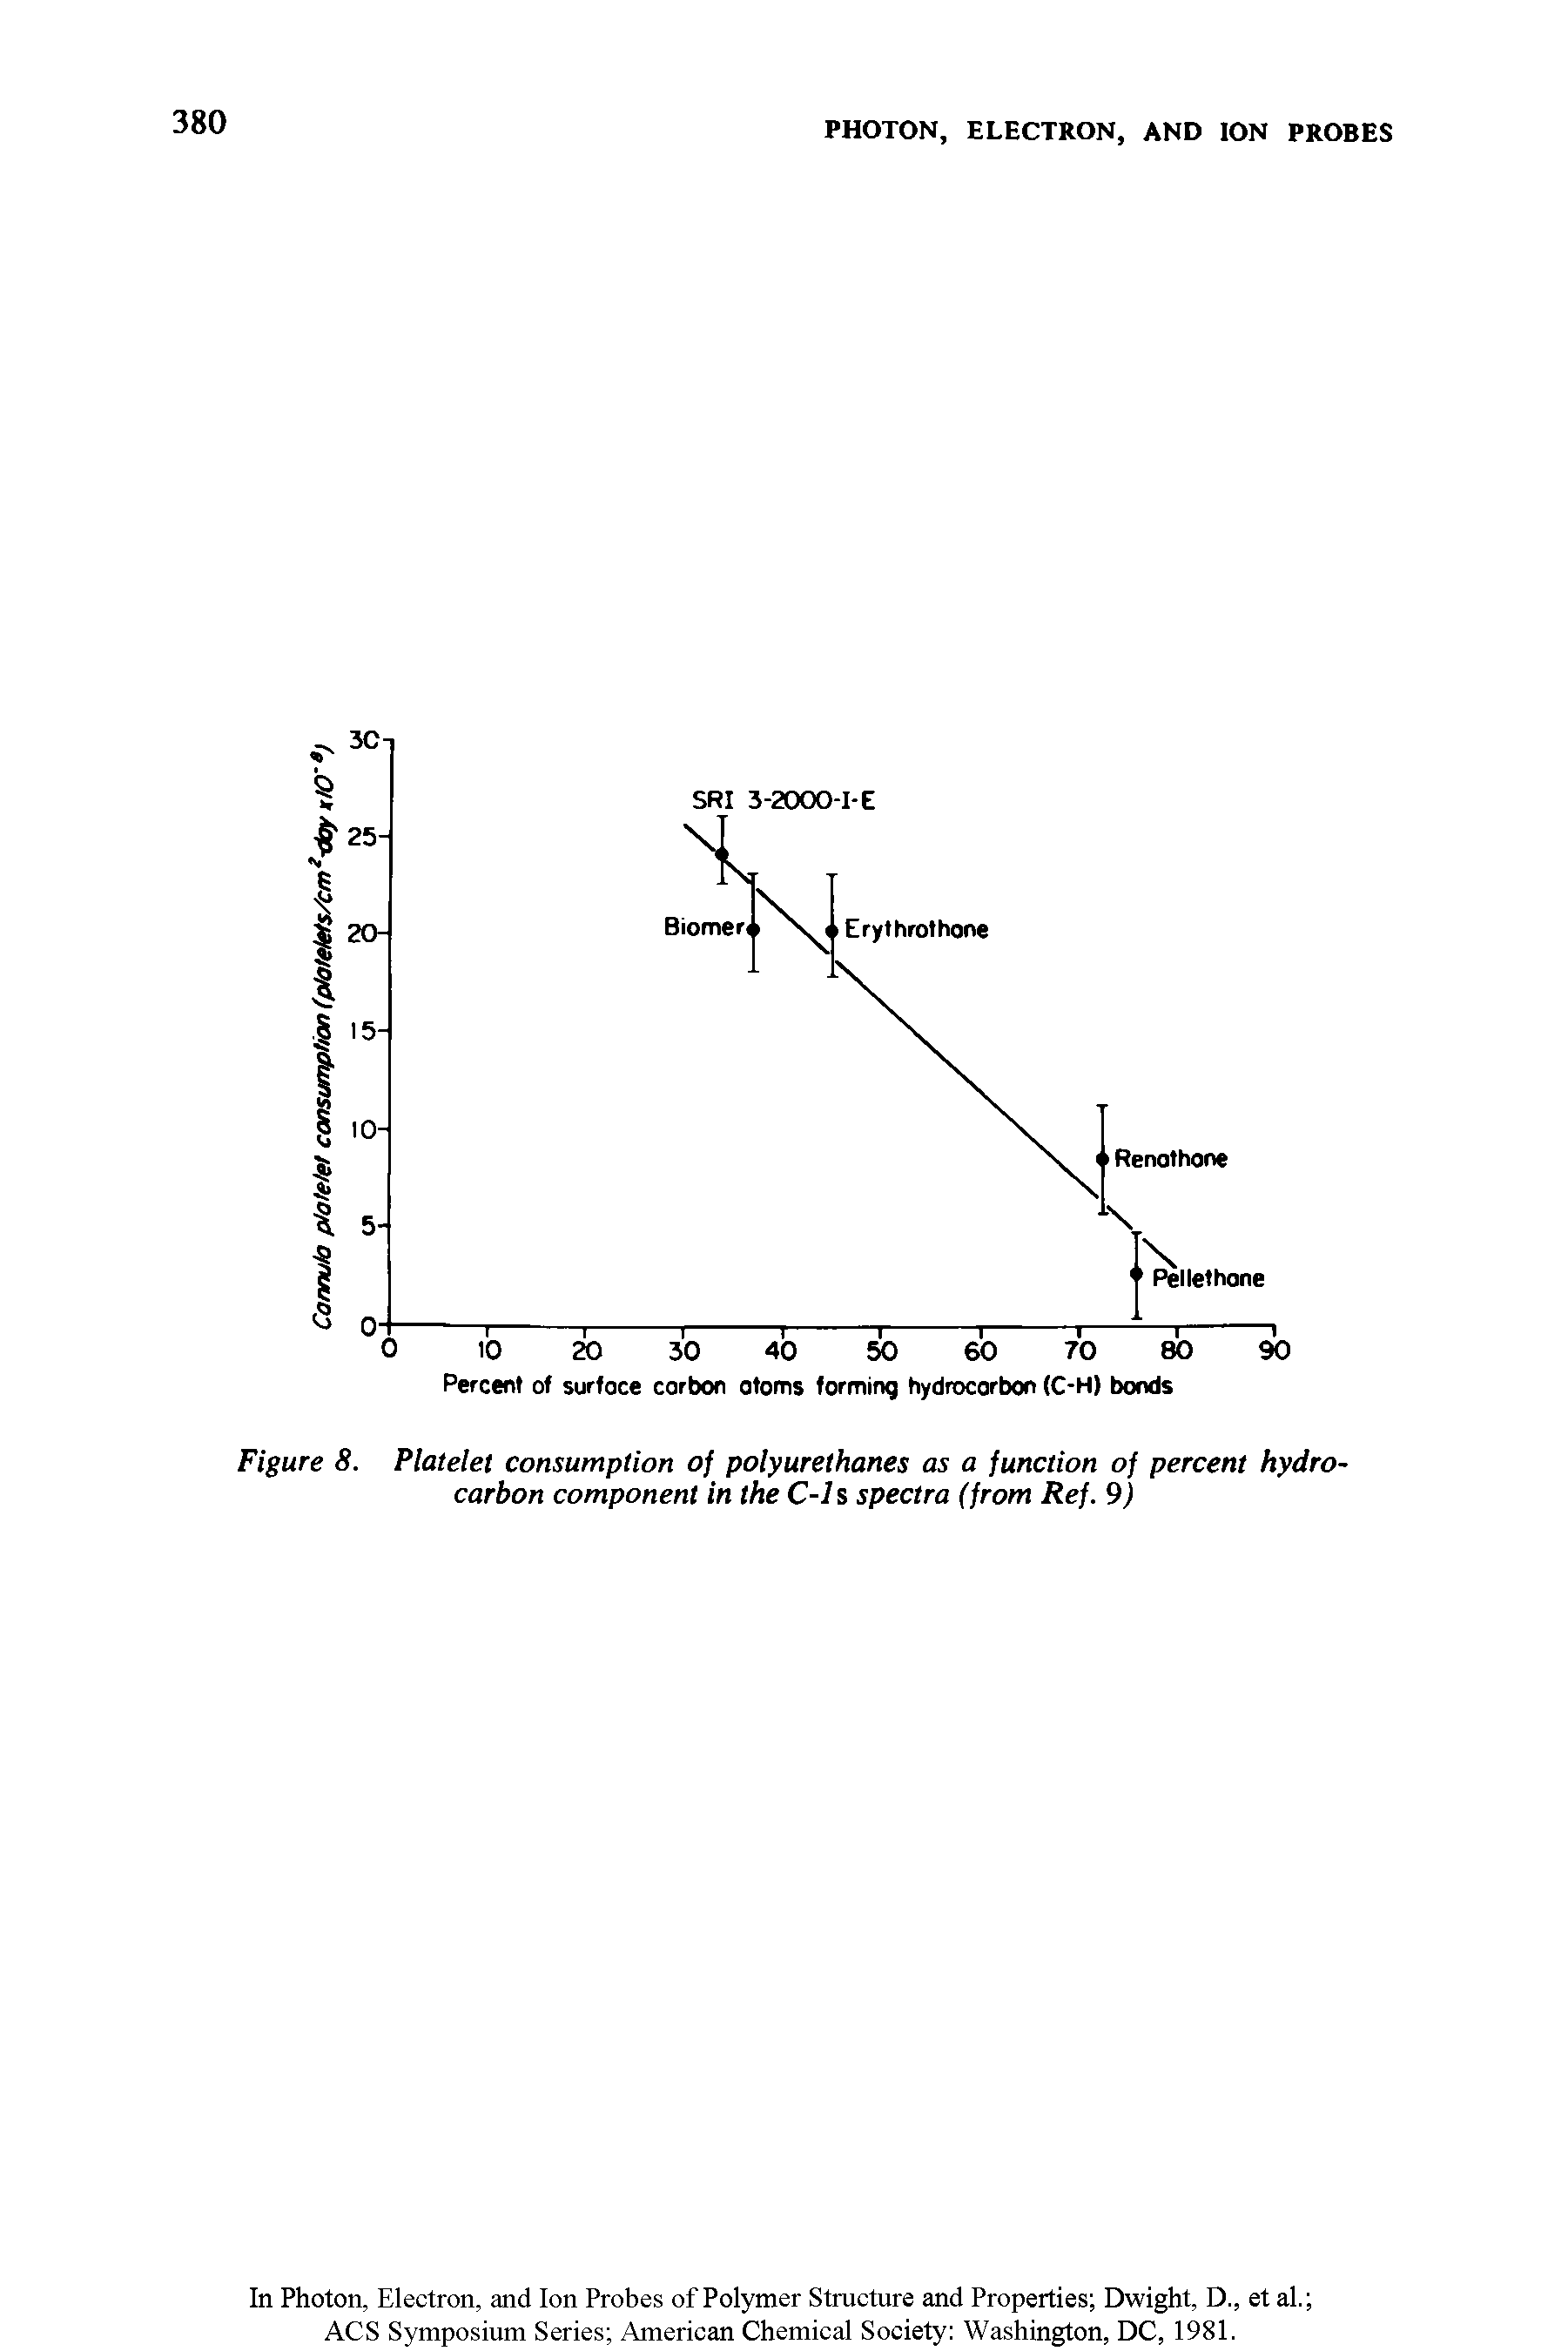 Figure 8. Platelet consumption of polyurethanes as a function of percent hydrocarbon component in the C-ls spectra (from Ref. 9)...